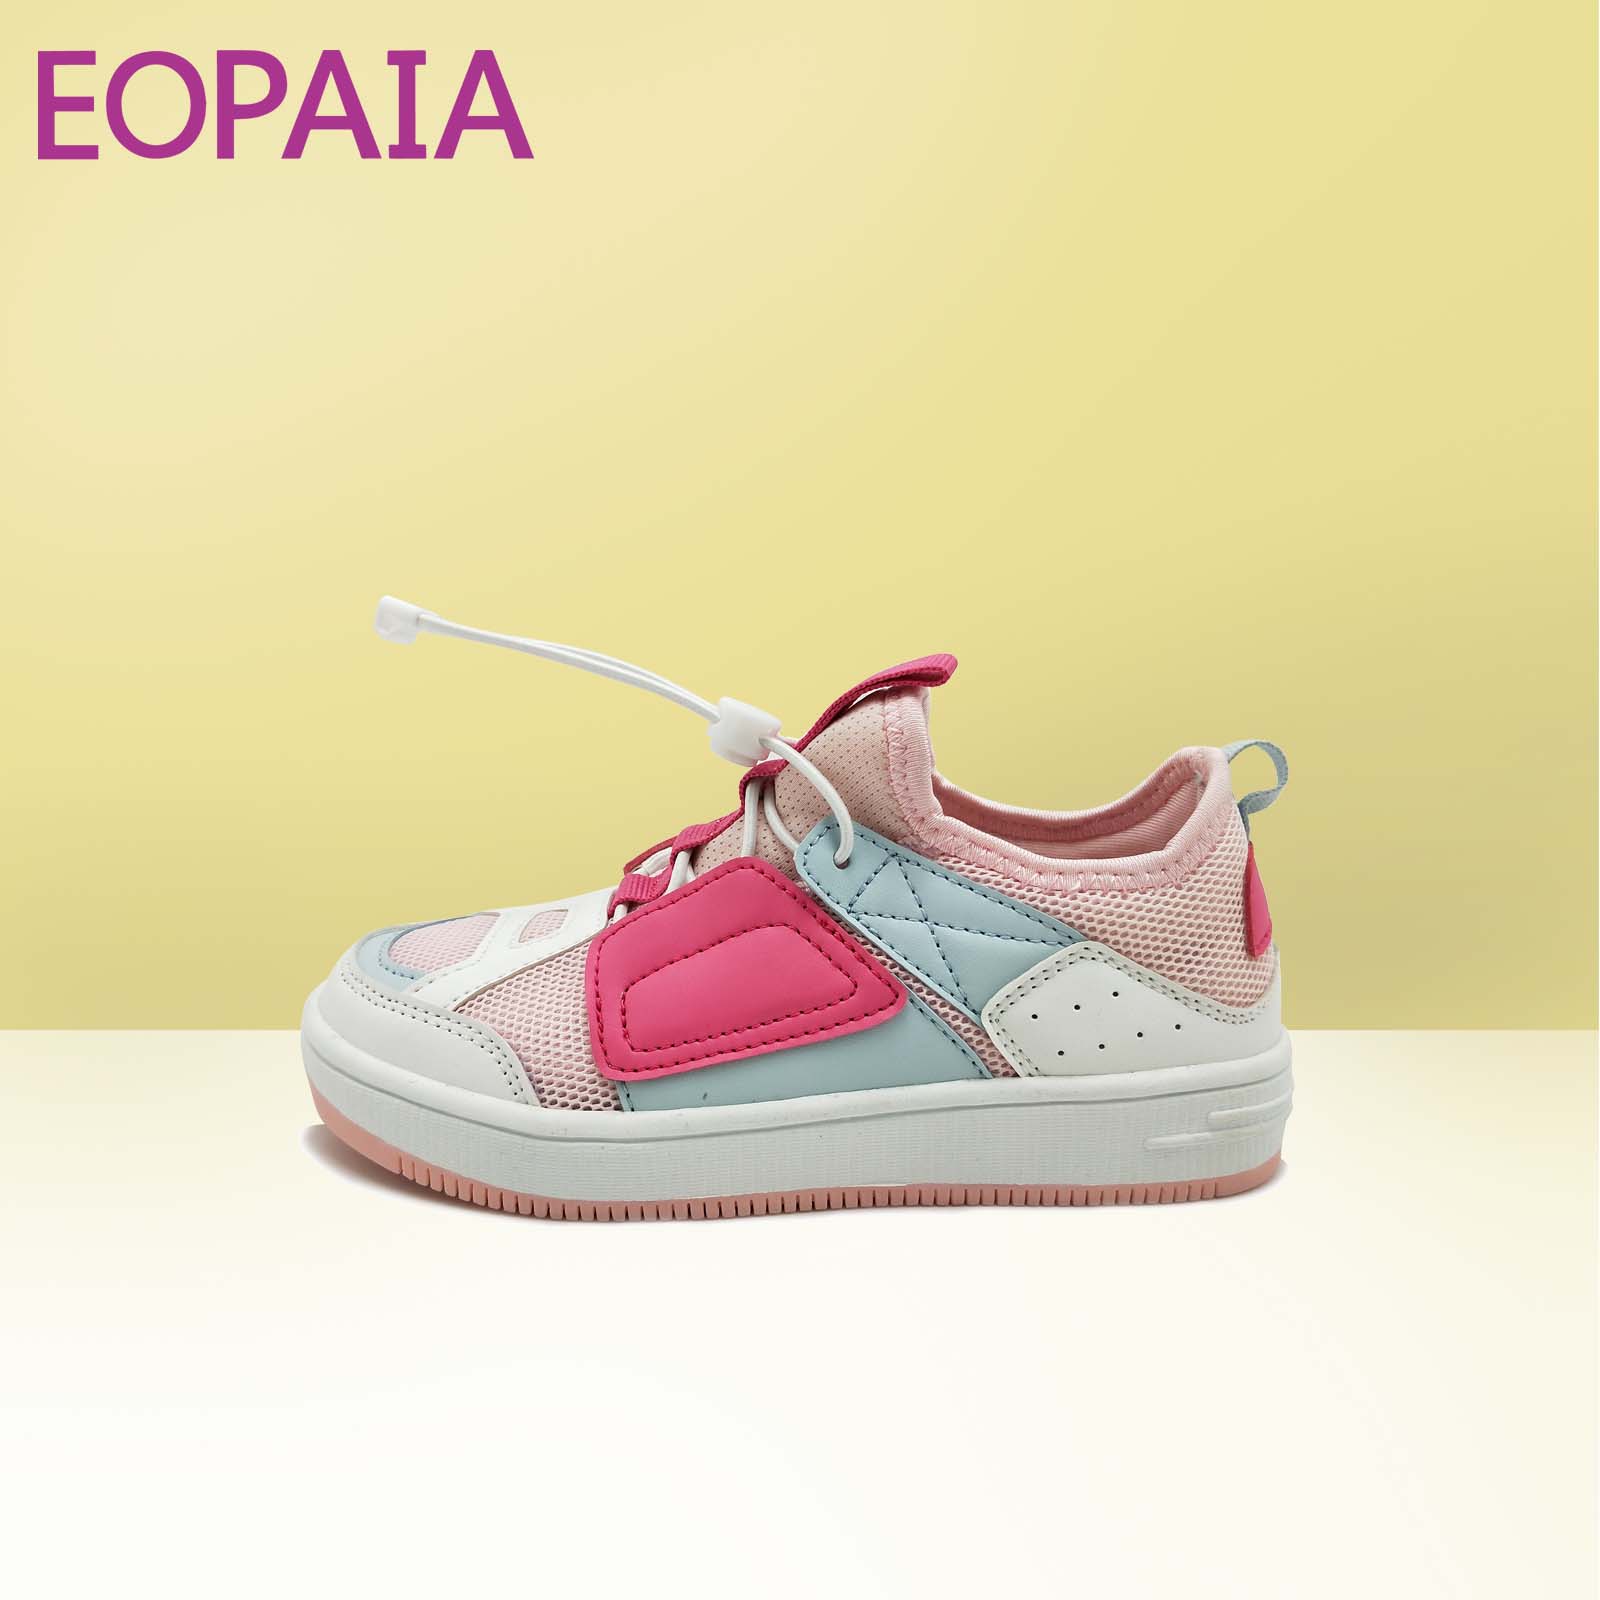 chaussures enfants chaussures chaussures chaussures chaussures chaussures de sport chaussures de mode occasionnels chaussures respirantes chaussures de baskets chaussures d'école